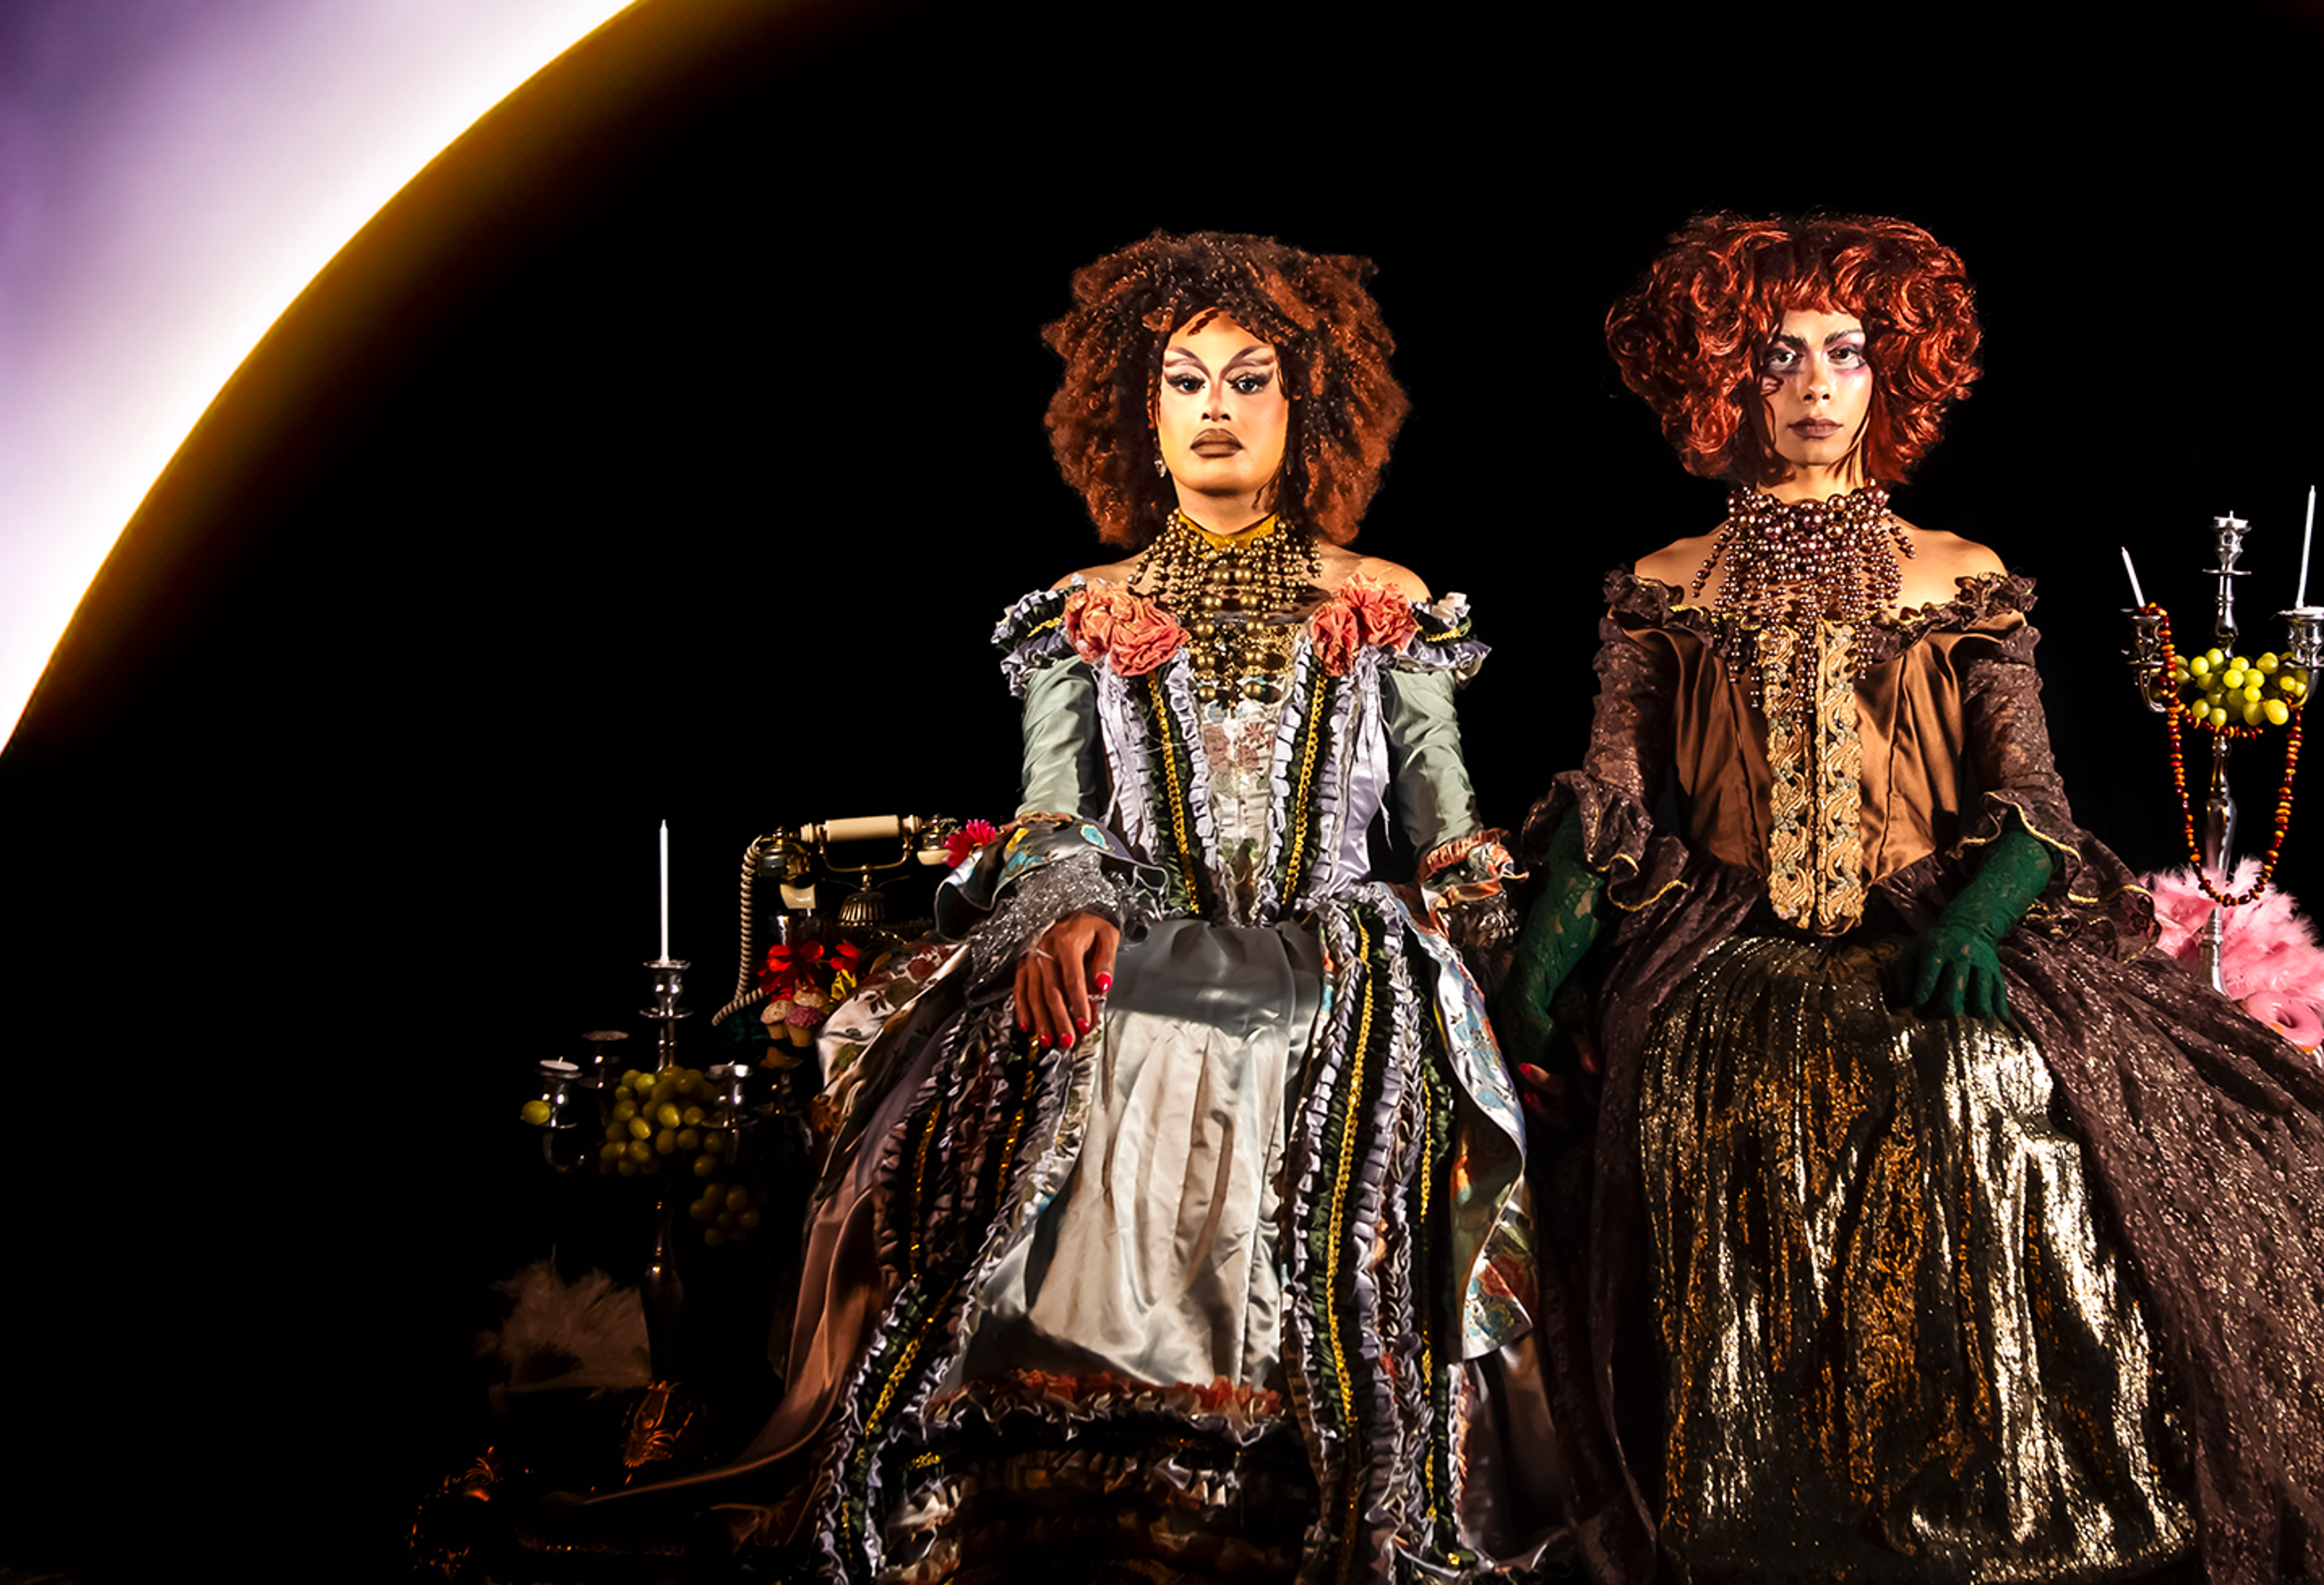 Two drag queens dressed in regal attire sit side by side, as if posing for a royal portrait. 